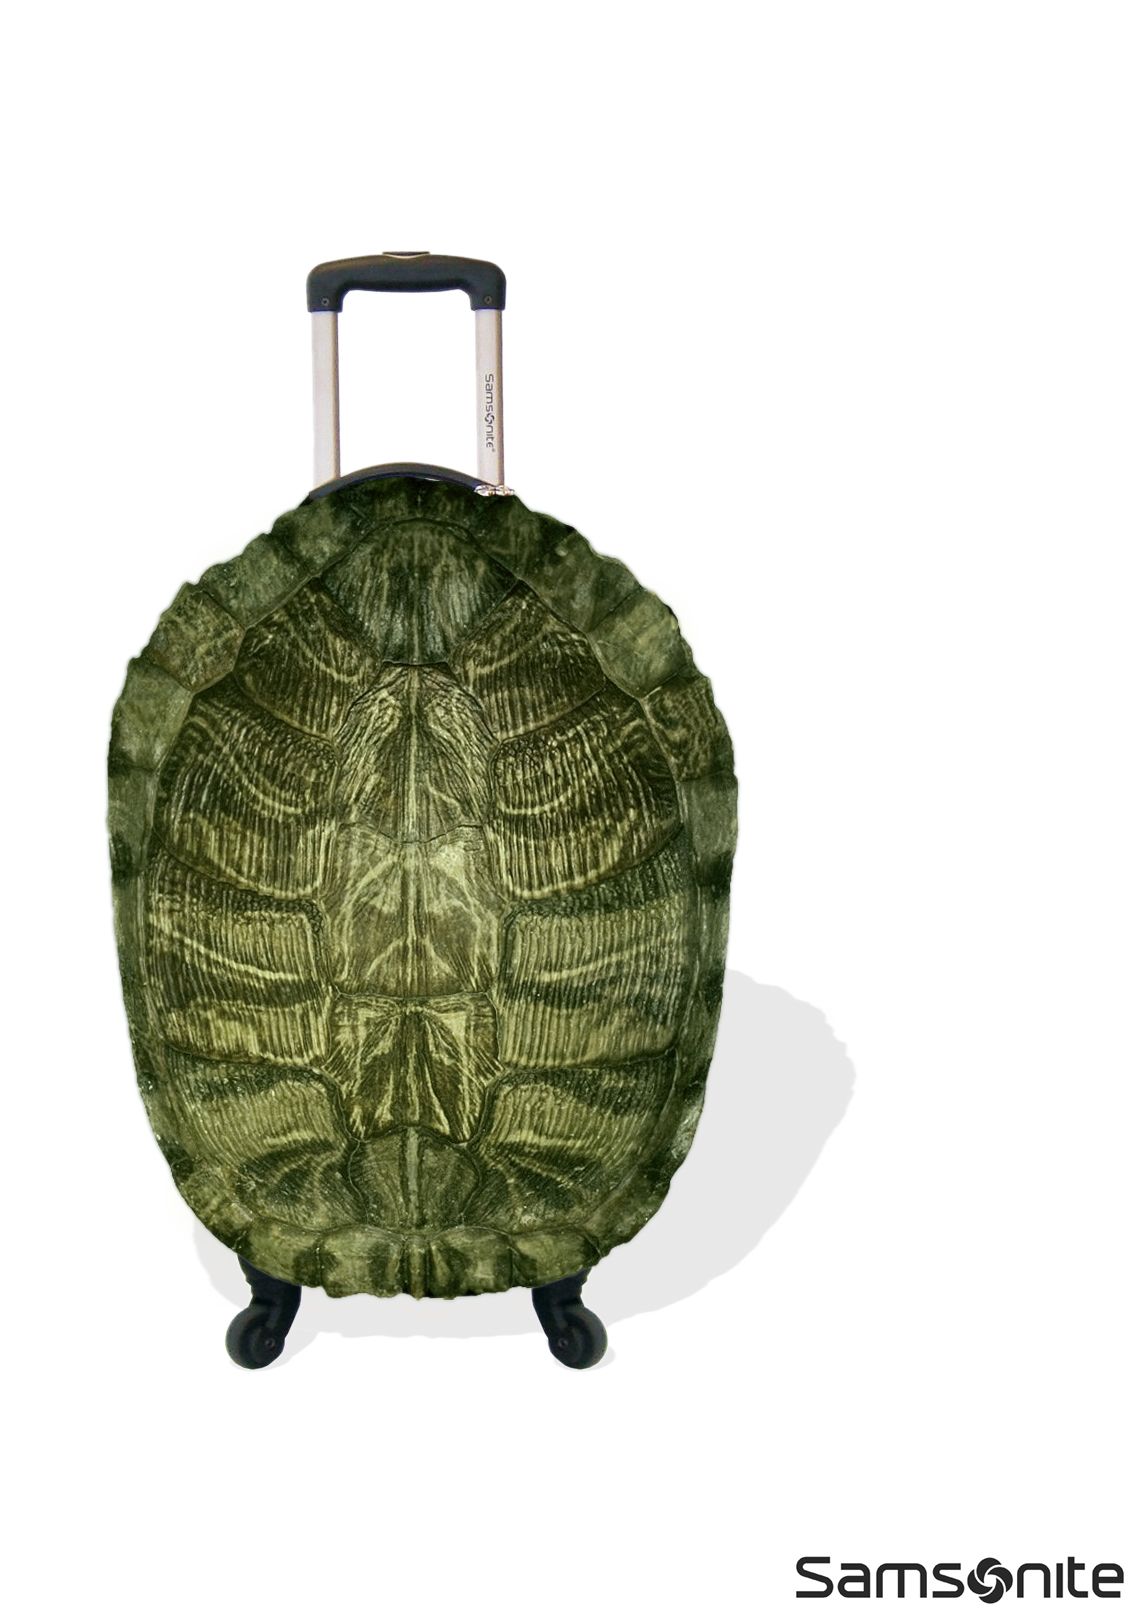 samsonite suitcace solid Turtle shell